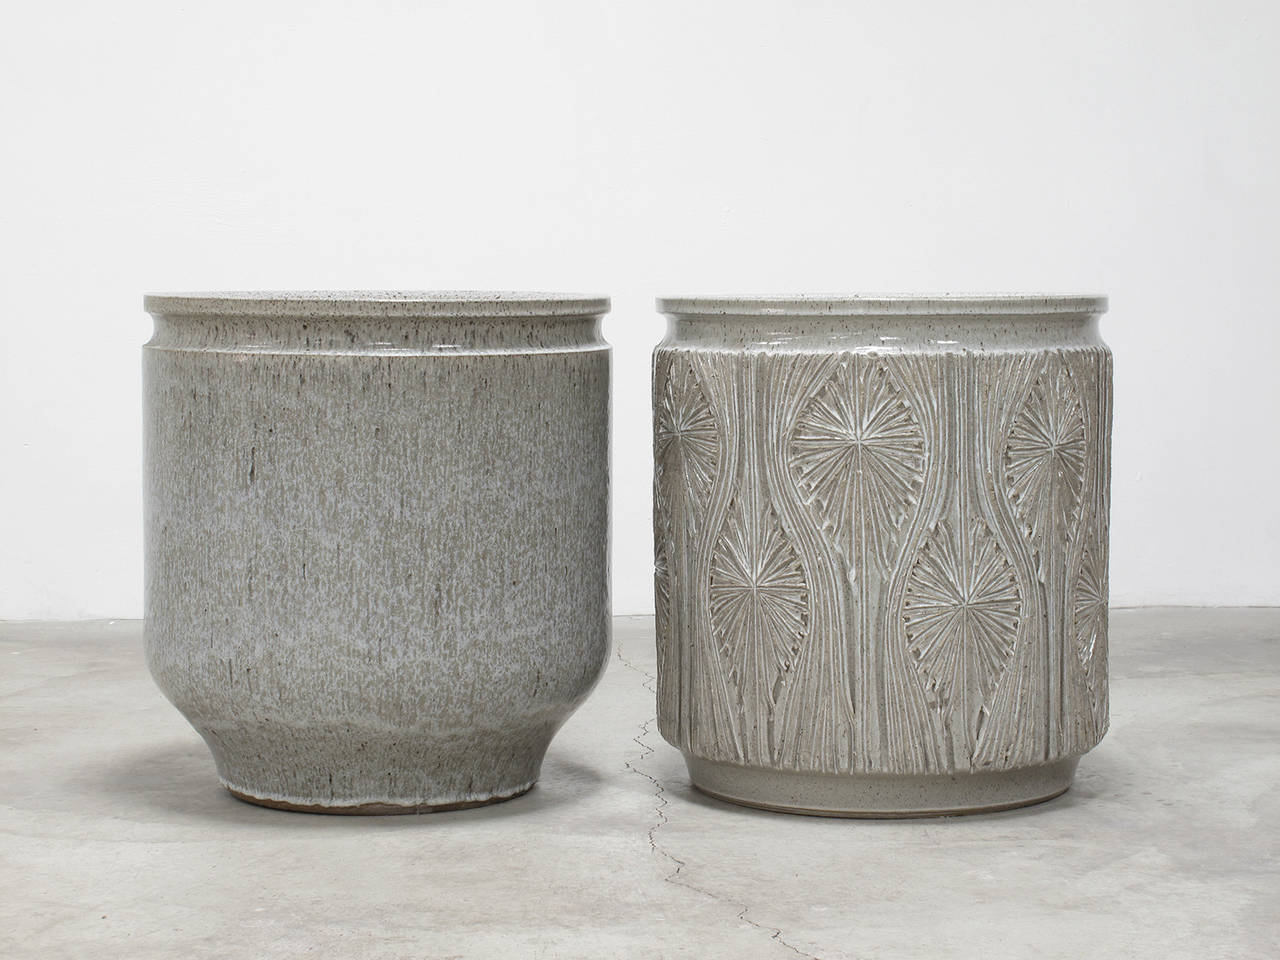 American Collection of Earthgender Vessels by David Cressey and Robert Maxwell For Sale